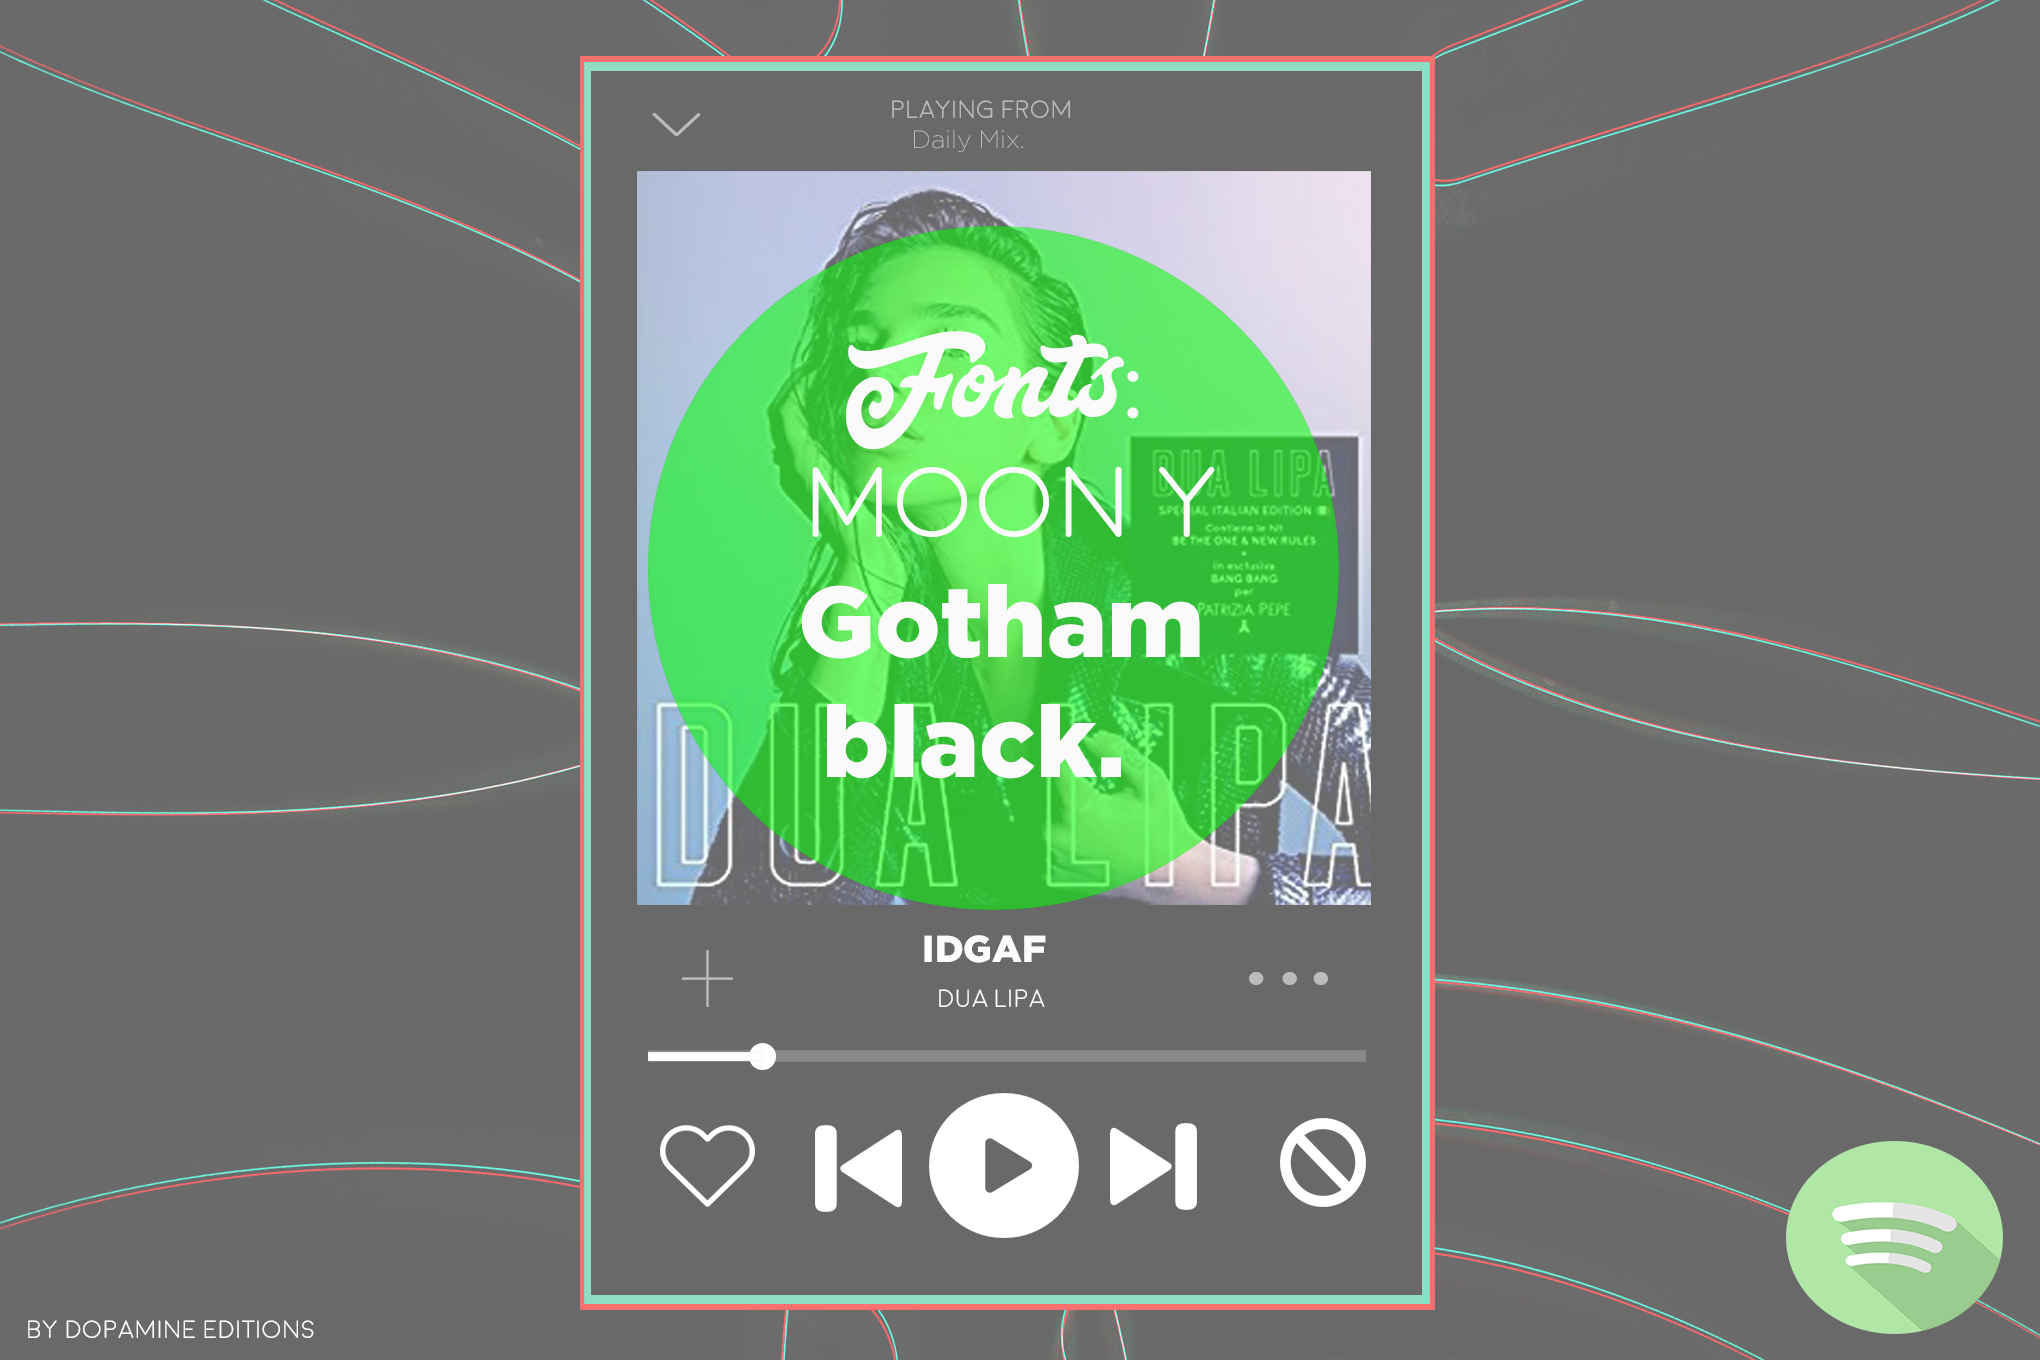 spotify-template-by-gia-by-xholyghost-on-deviantart